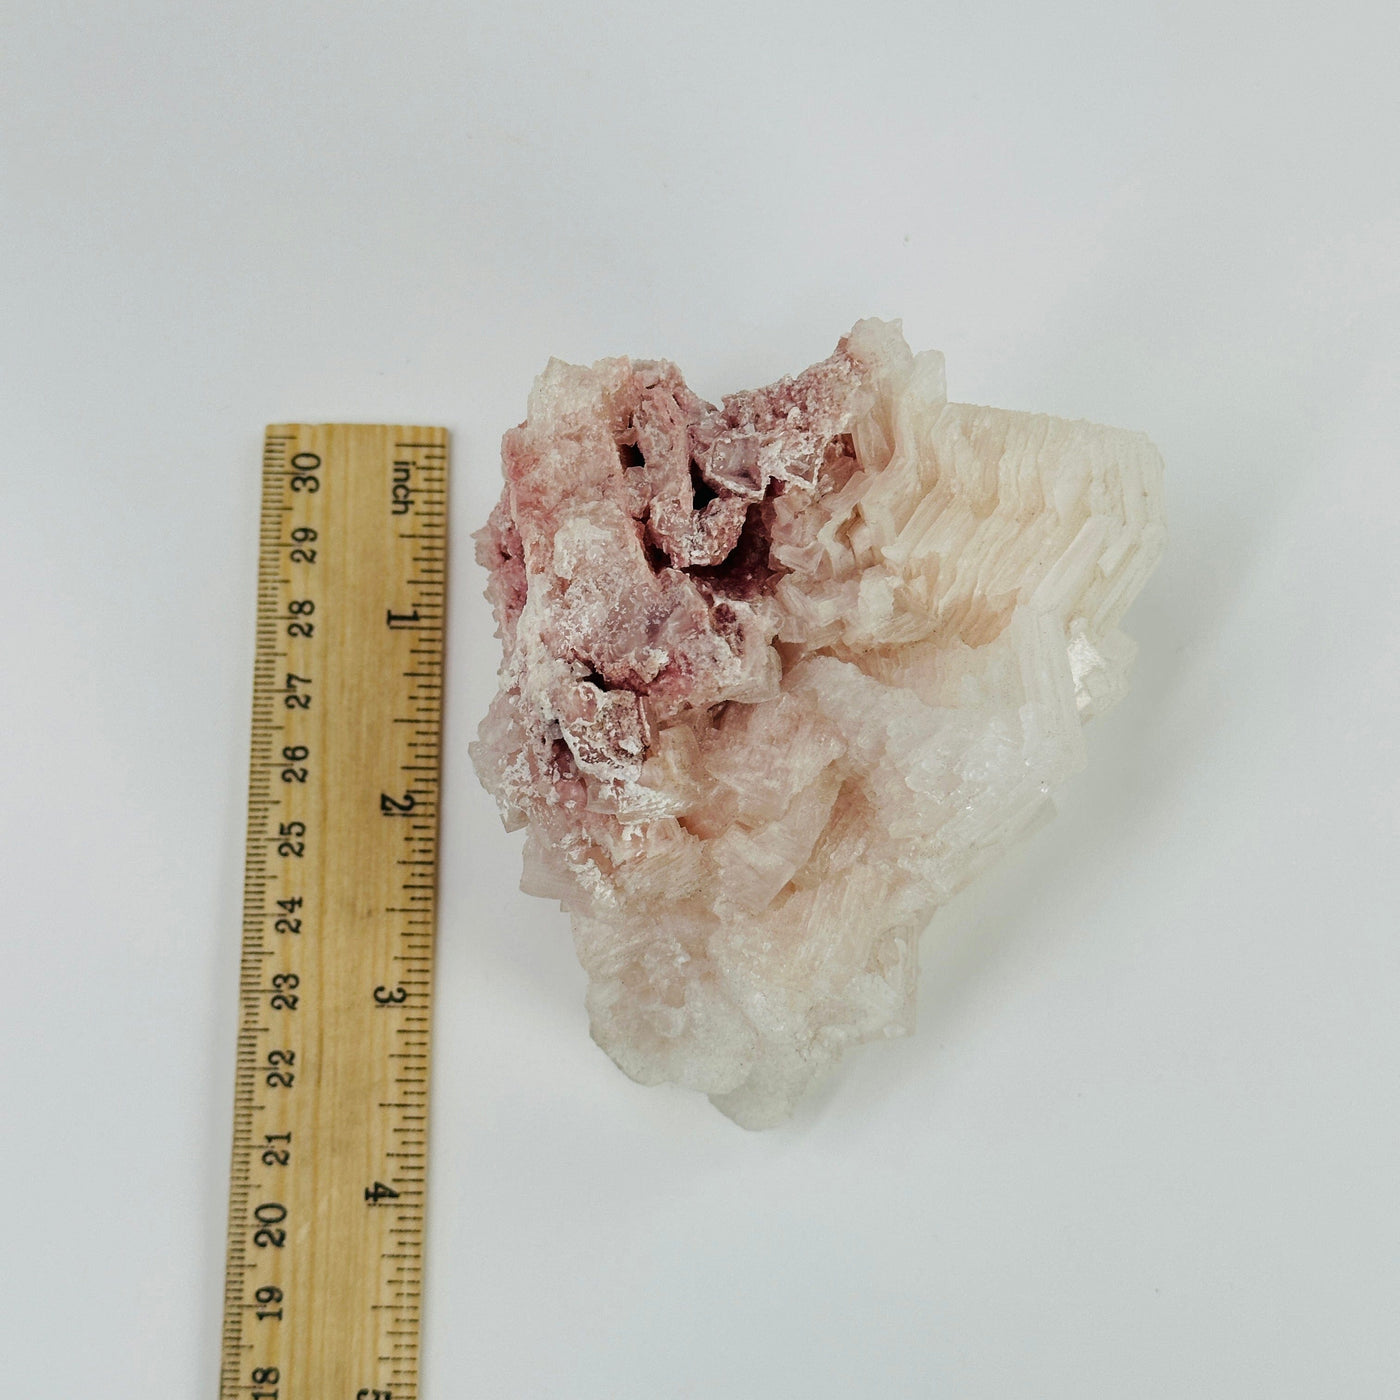 Pink halite cluster next to a ruler for size reference 